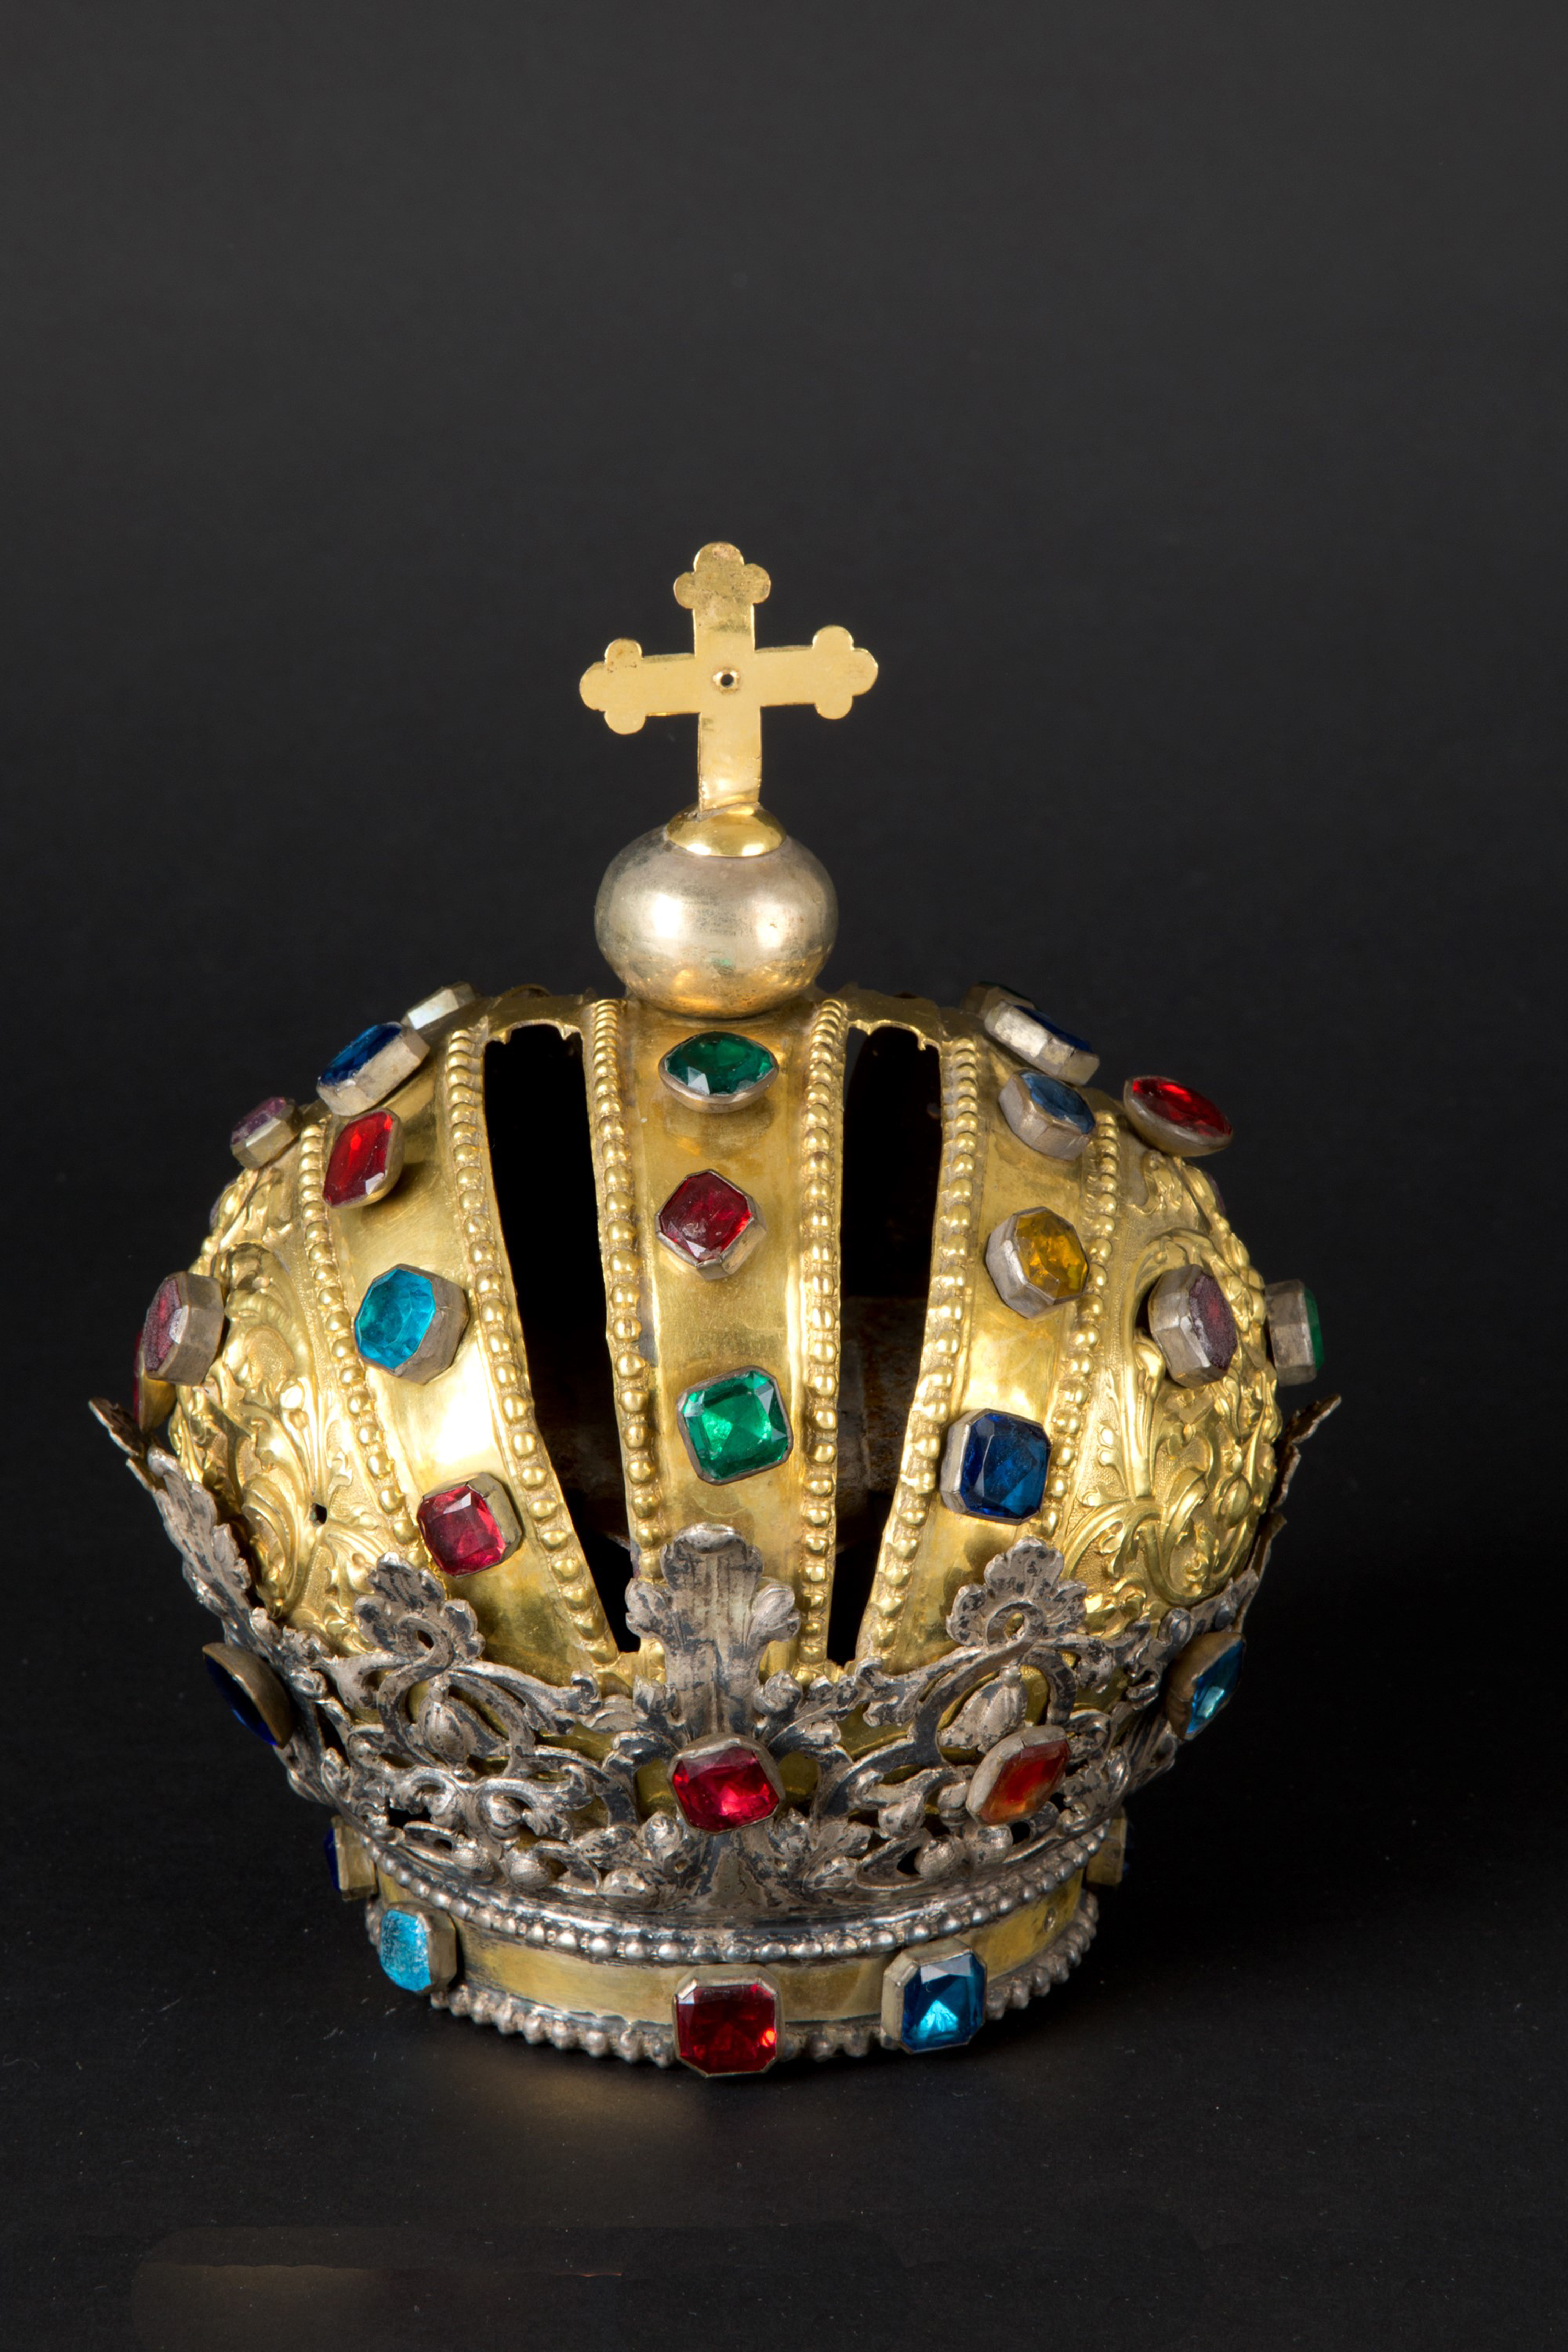 Gold and silver metal crown